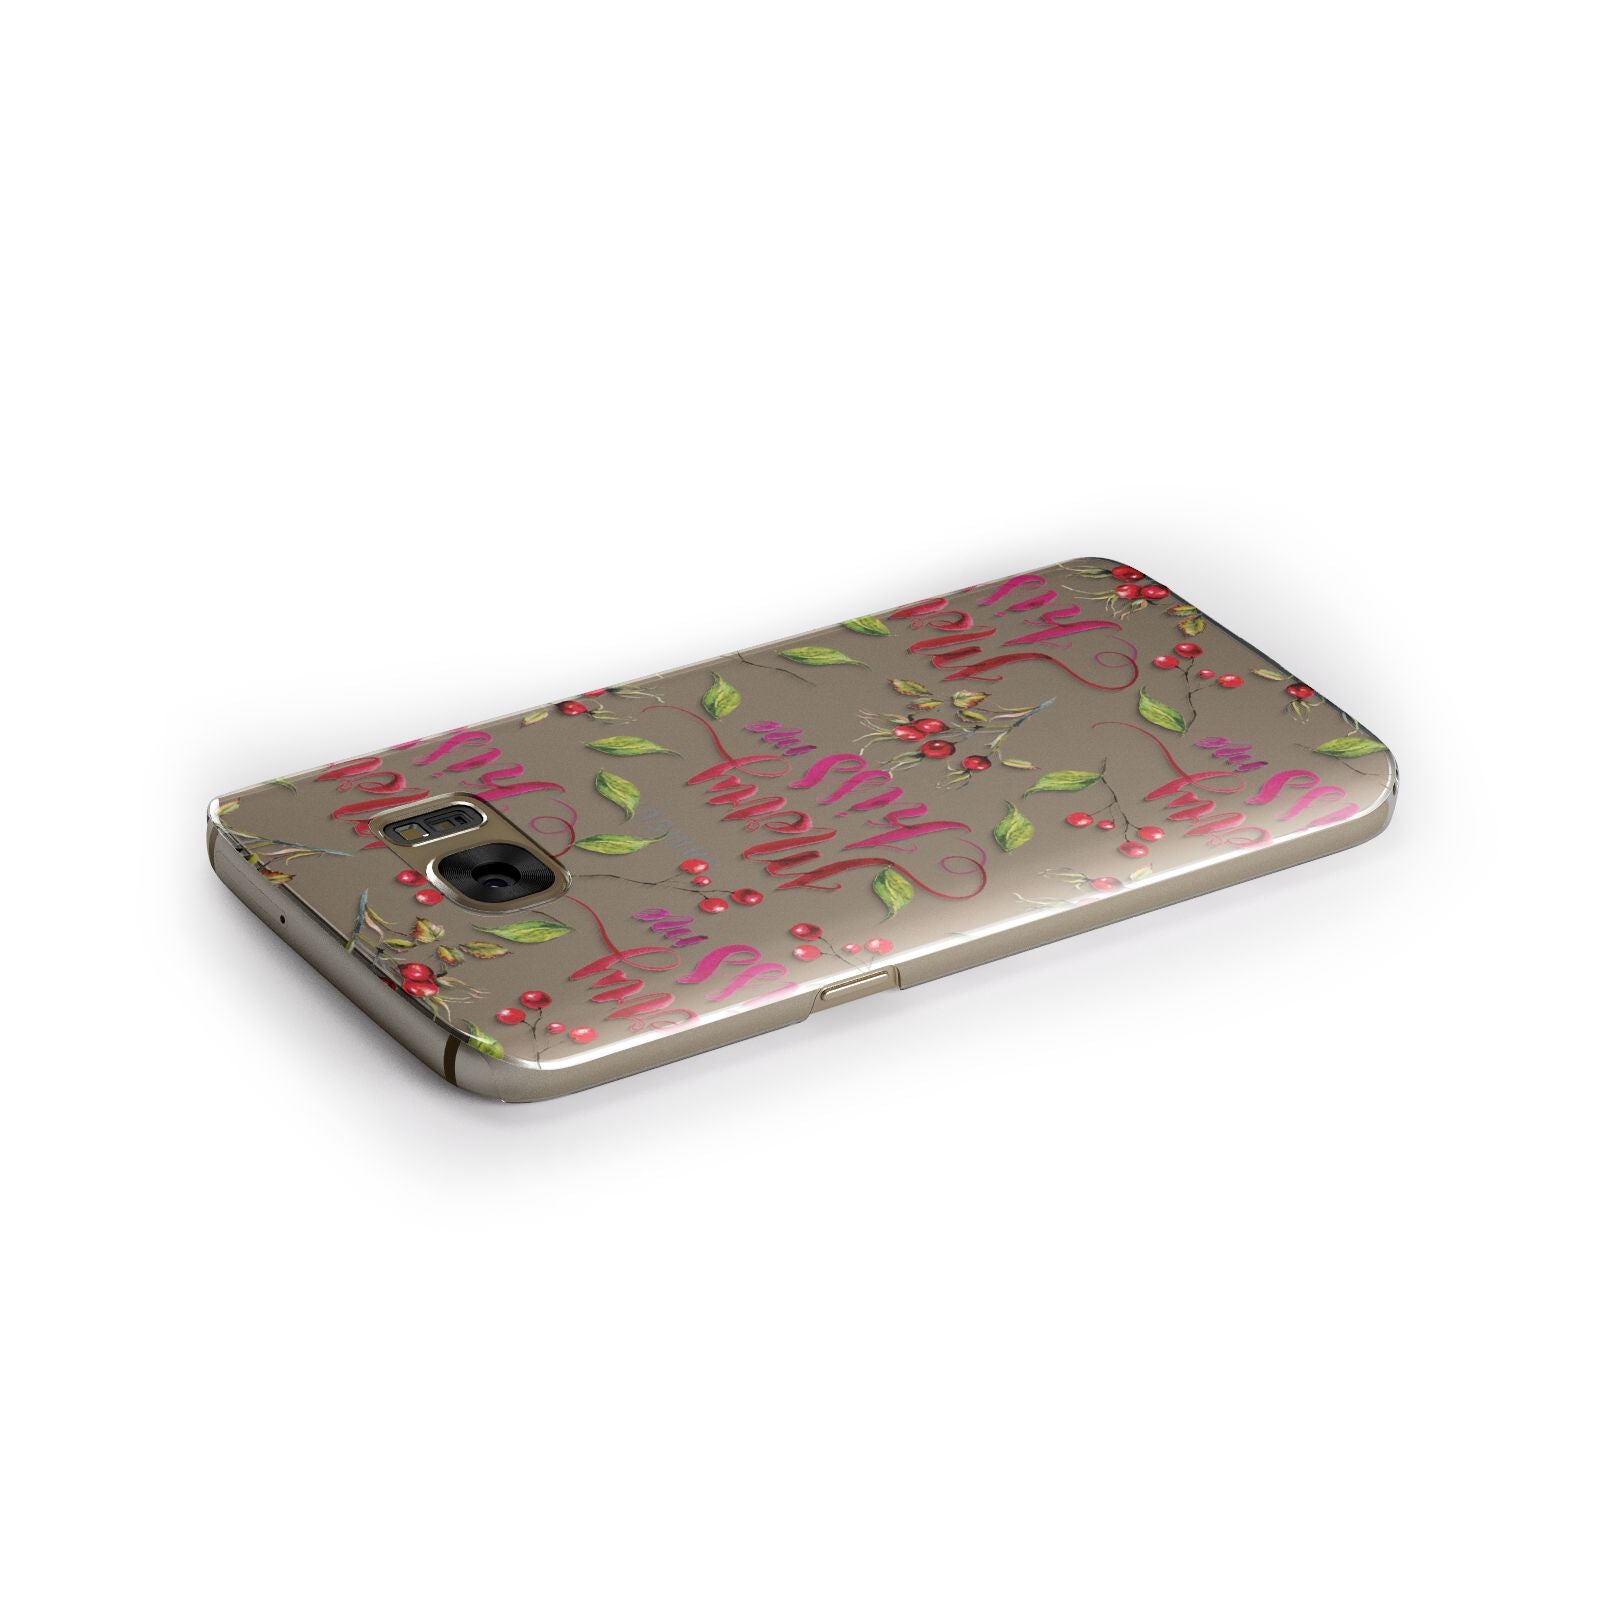 Merry kiss me Samsung Galaxy Case Side Close Up